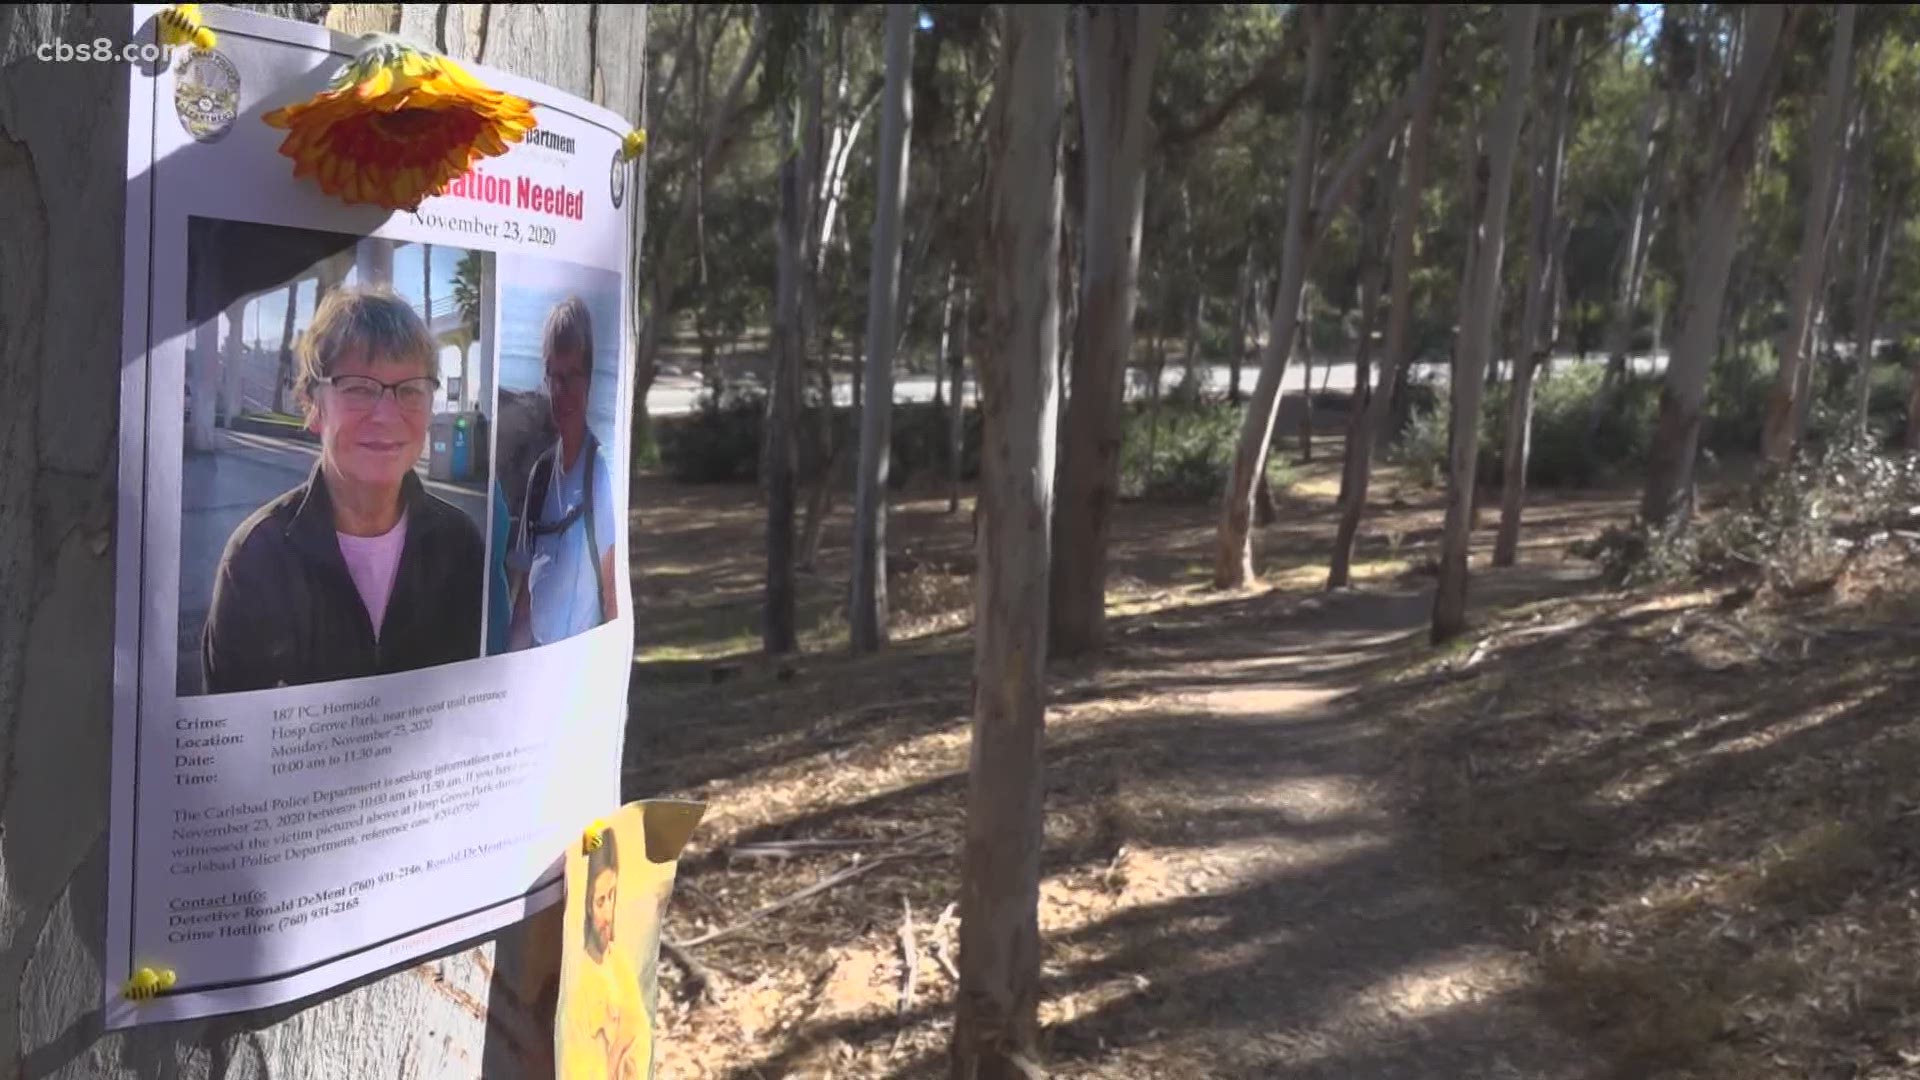 Police are still searching for the person that killed a 68-year-old hiker in Carlsbad last week.